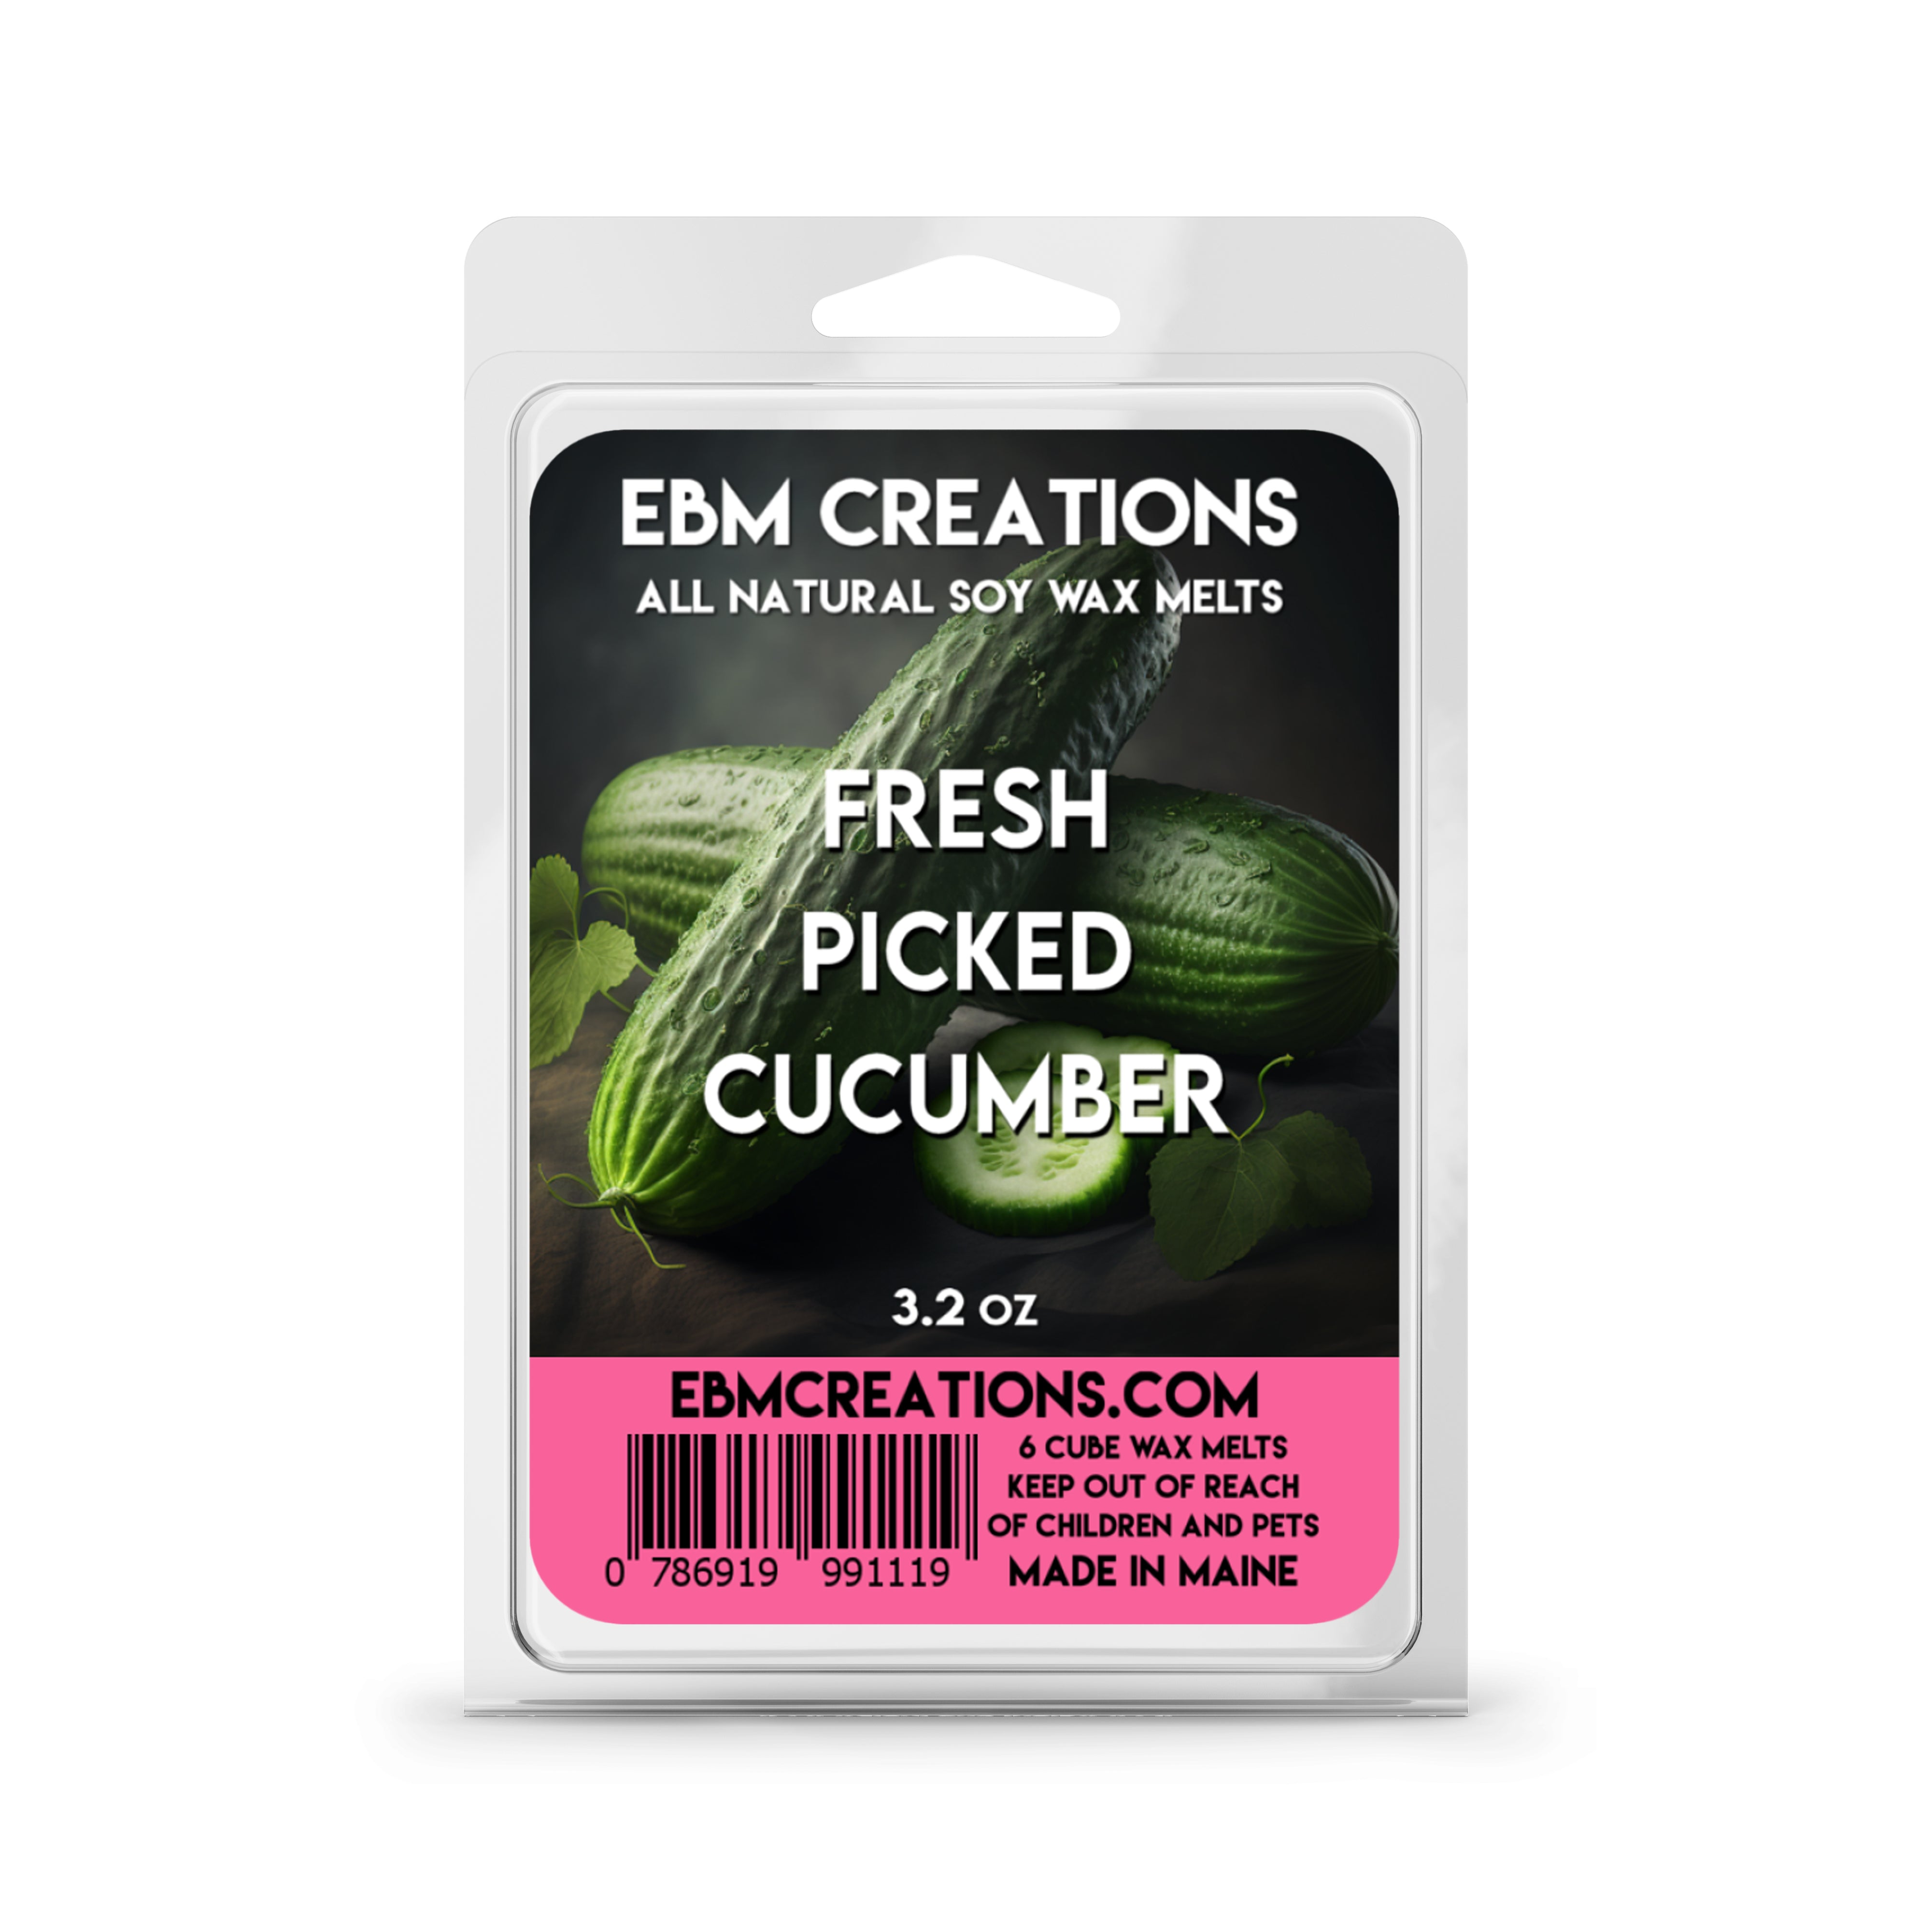 Fresh Picked Cucumber - 3.2 oz Clamshell